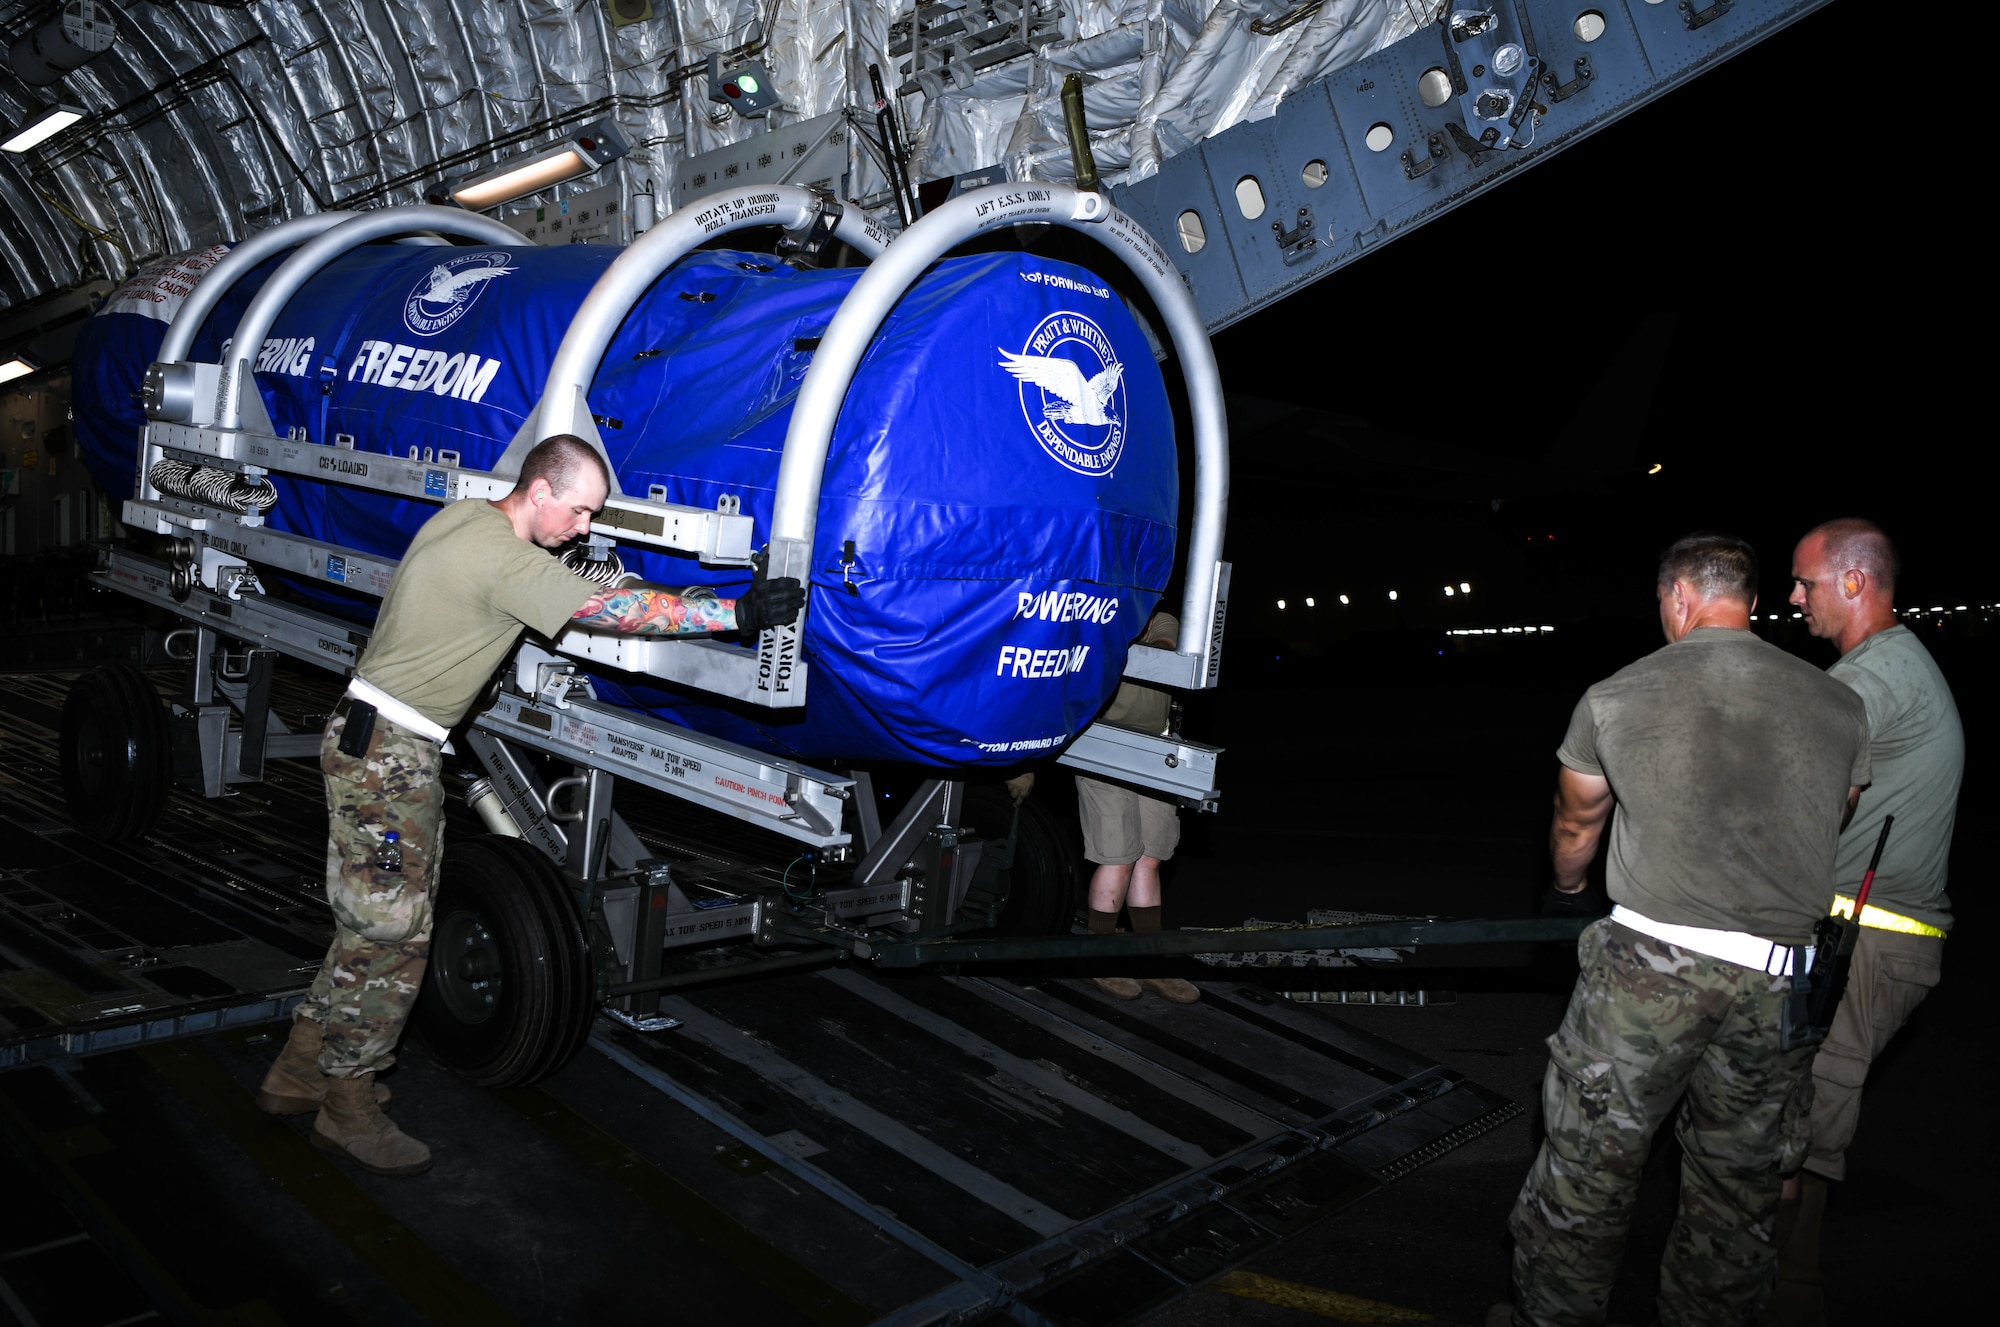 Members of the 380th Expeditionary Logistics Readiness Squadron Air Terminal Operations Center wheel an F-35A Lightning II engine out of a C-17 Globemaster III aircraft, August 26, 2020, at Al Dhafra Air Base, United Arab Emirates.